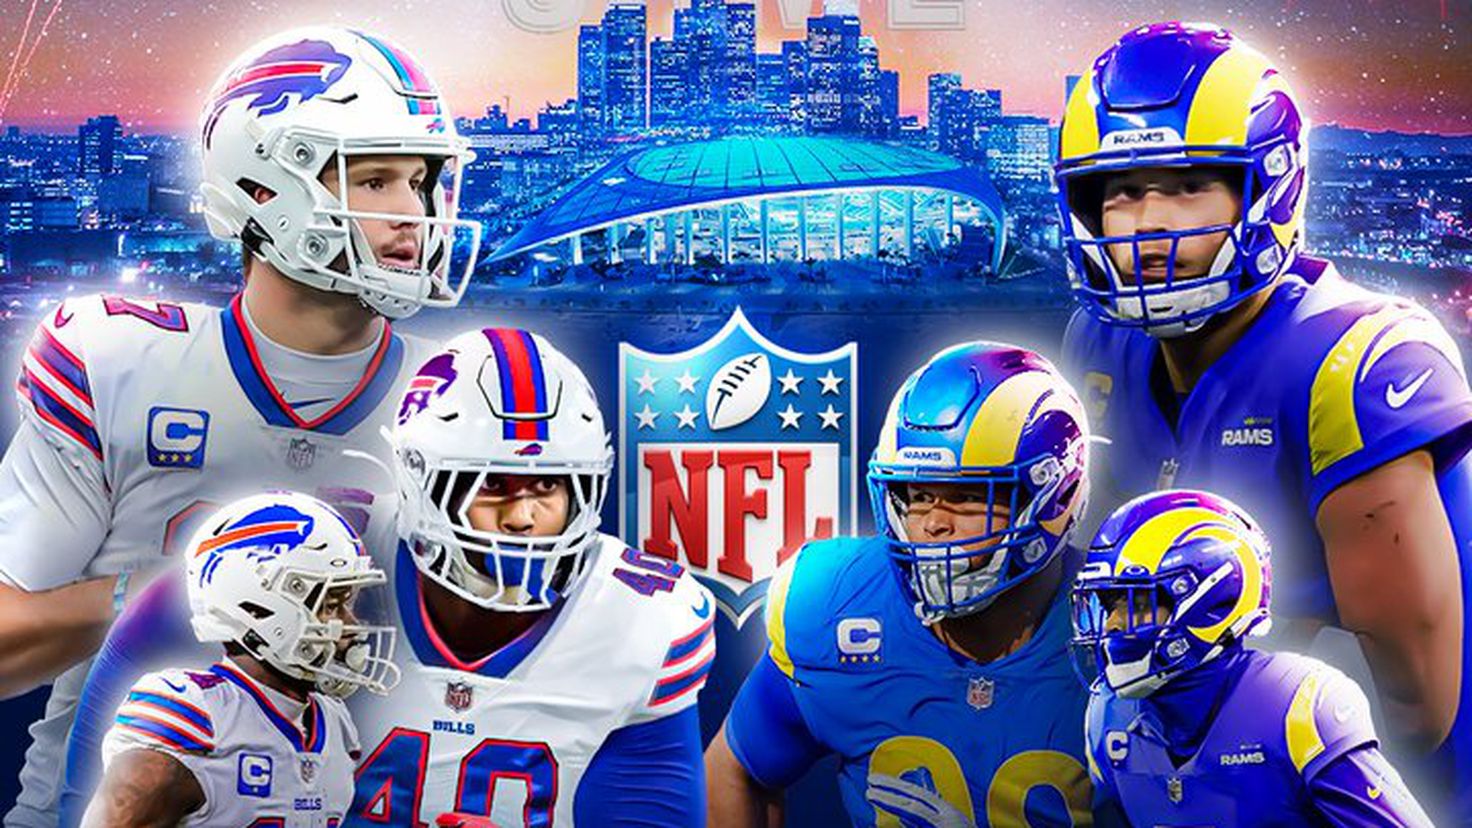 Bills vs Rams Key stories to watch in the 2022 NFL kickoff game today